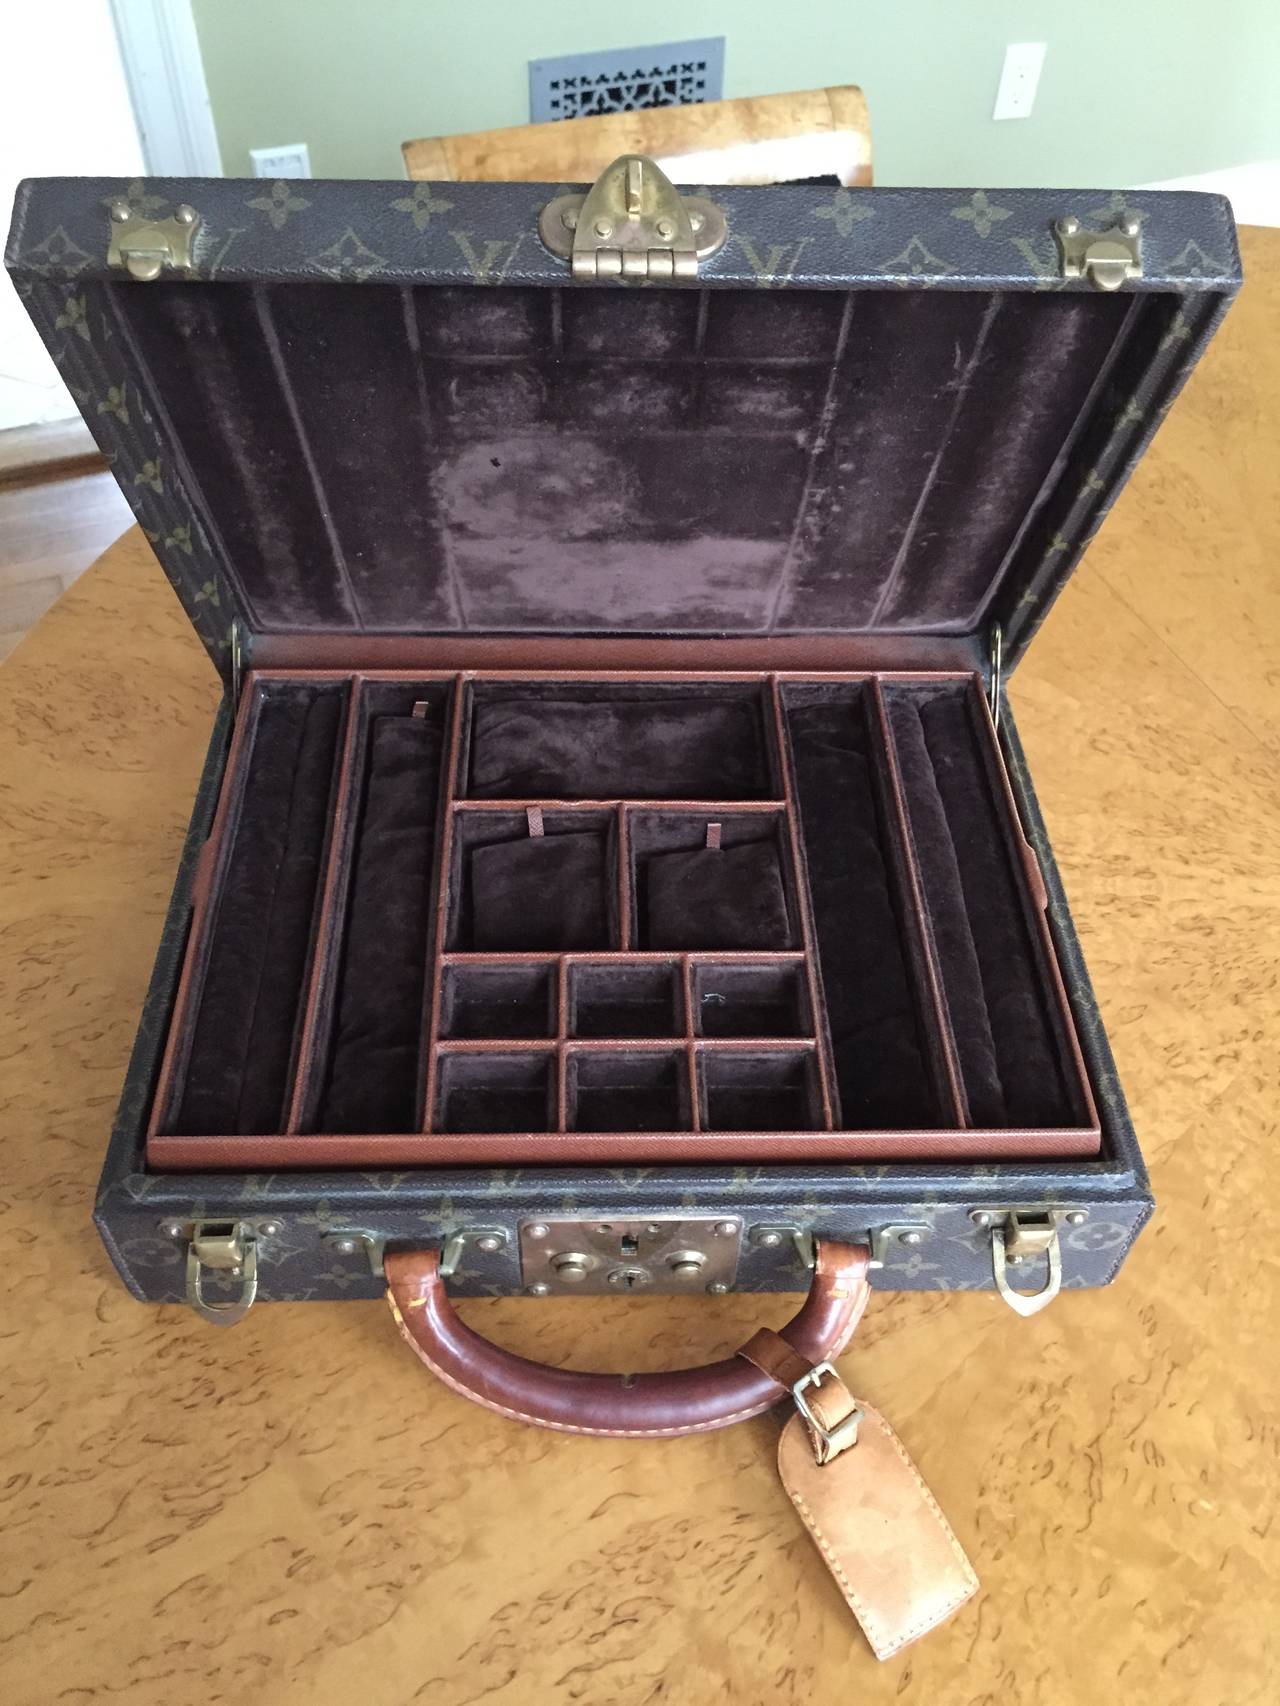 Louis Vuitton Vintage Travel Case for Fine Jewelry.This has been lovingly used to travel the world, and has a wonderful patina.
There are a couple of small dings on the edges of one side, please see the detail photos .
Comes with key and name tag.